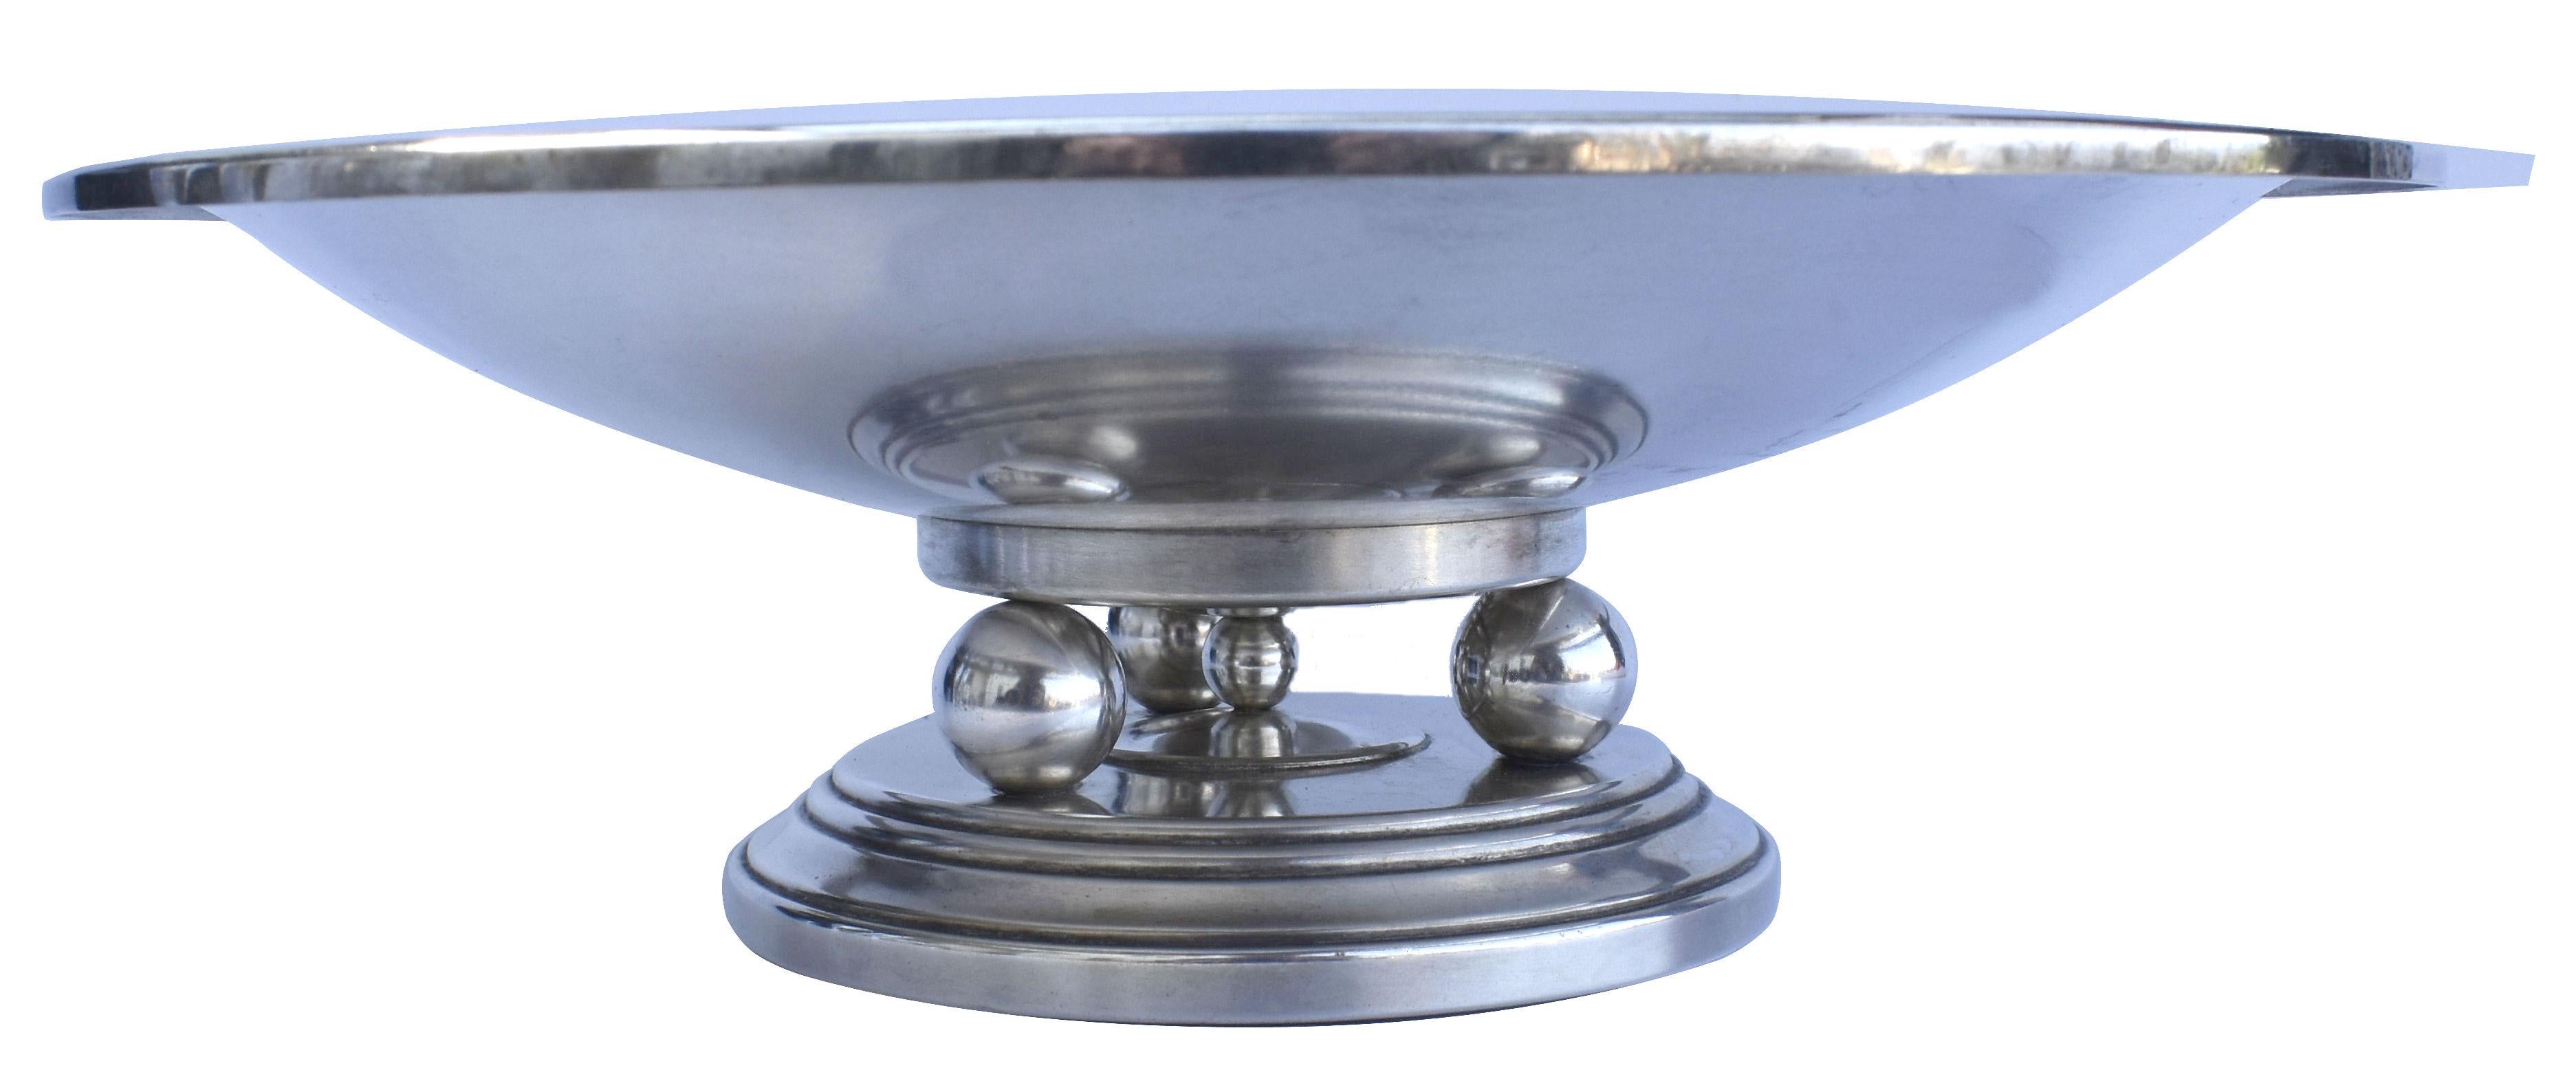 Superbly stylish large Art Deco chrome plated modernist coupe /comport dating to the 1930's and originating from France. The design is a simple circular dish which has three circular chrome balls underneath which act as the column between base and